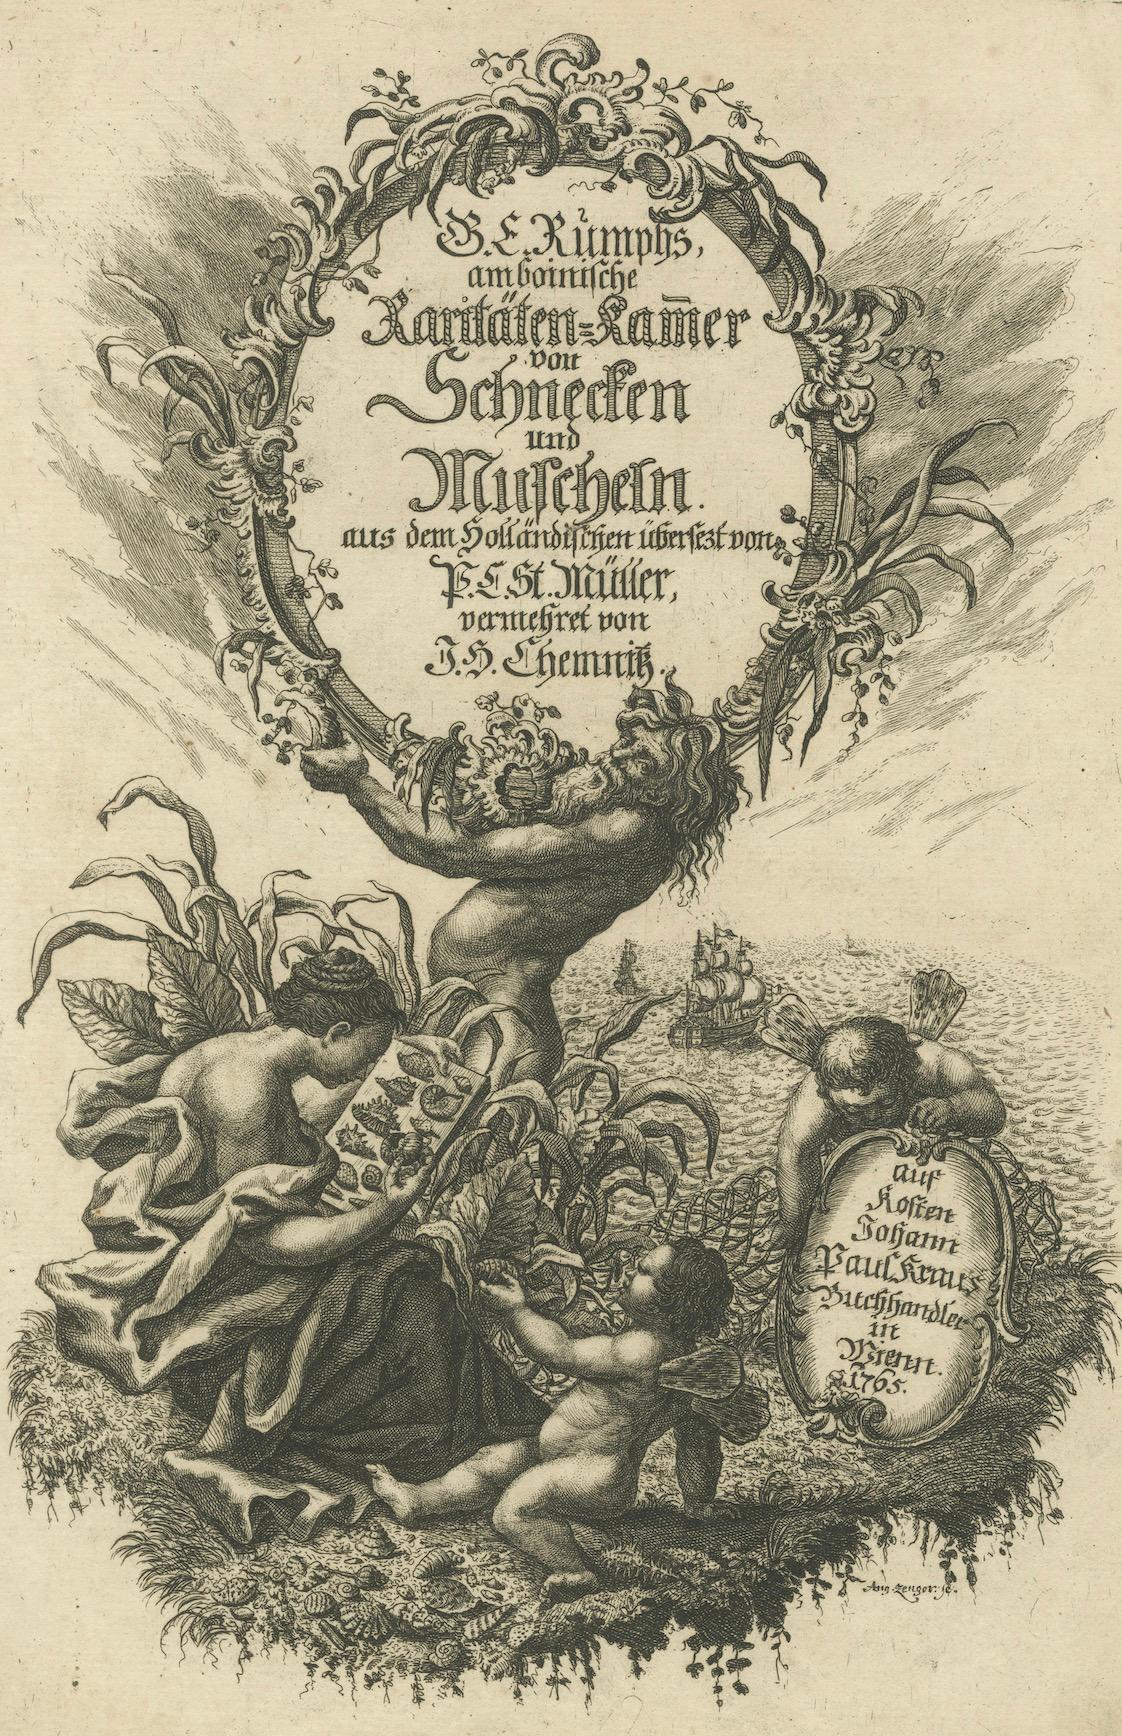 The Amboinese Cabinet of Curiosities was a work  by Georg Eberhard Rumphius, and included many engravings of sea shells and crustaceans.

The German edition of the book was financed by Johann Balthasar Probst, publisher in Augsburg.

As for the